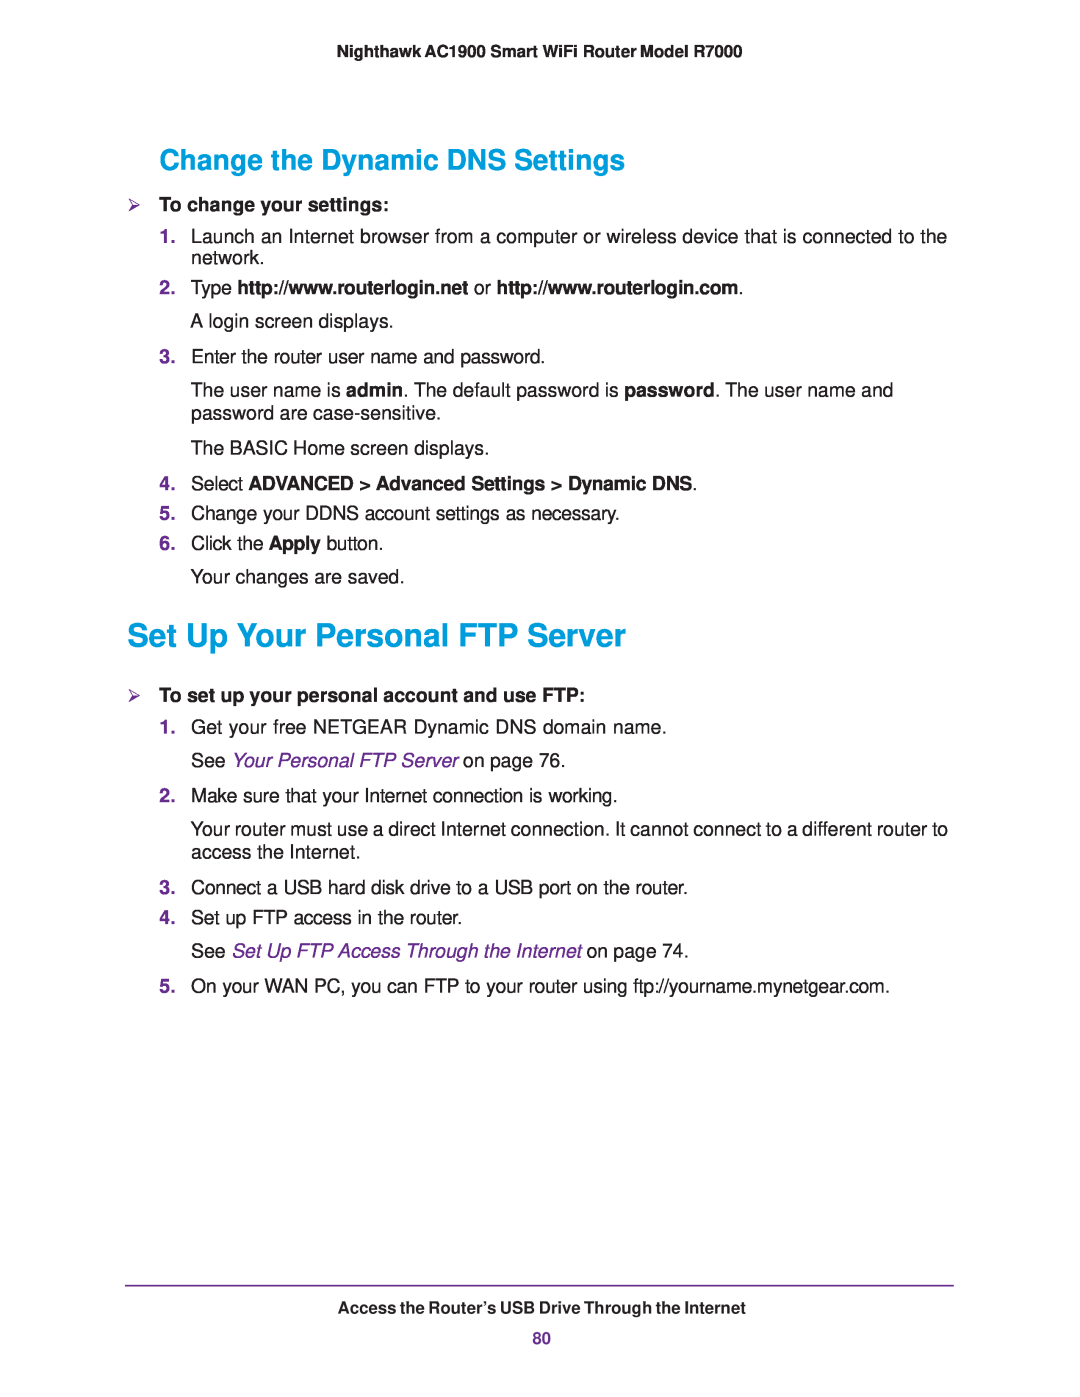 NETGEAR R7000 user manual Set Up Your Personal FTP Server, Change the Dynamic DNS Settings,  To change your settings 